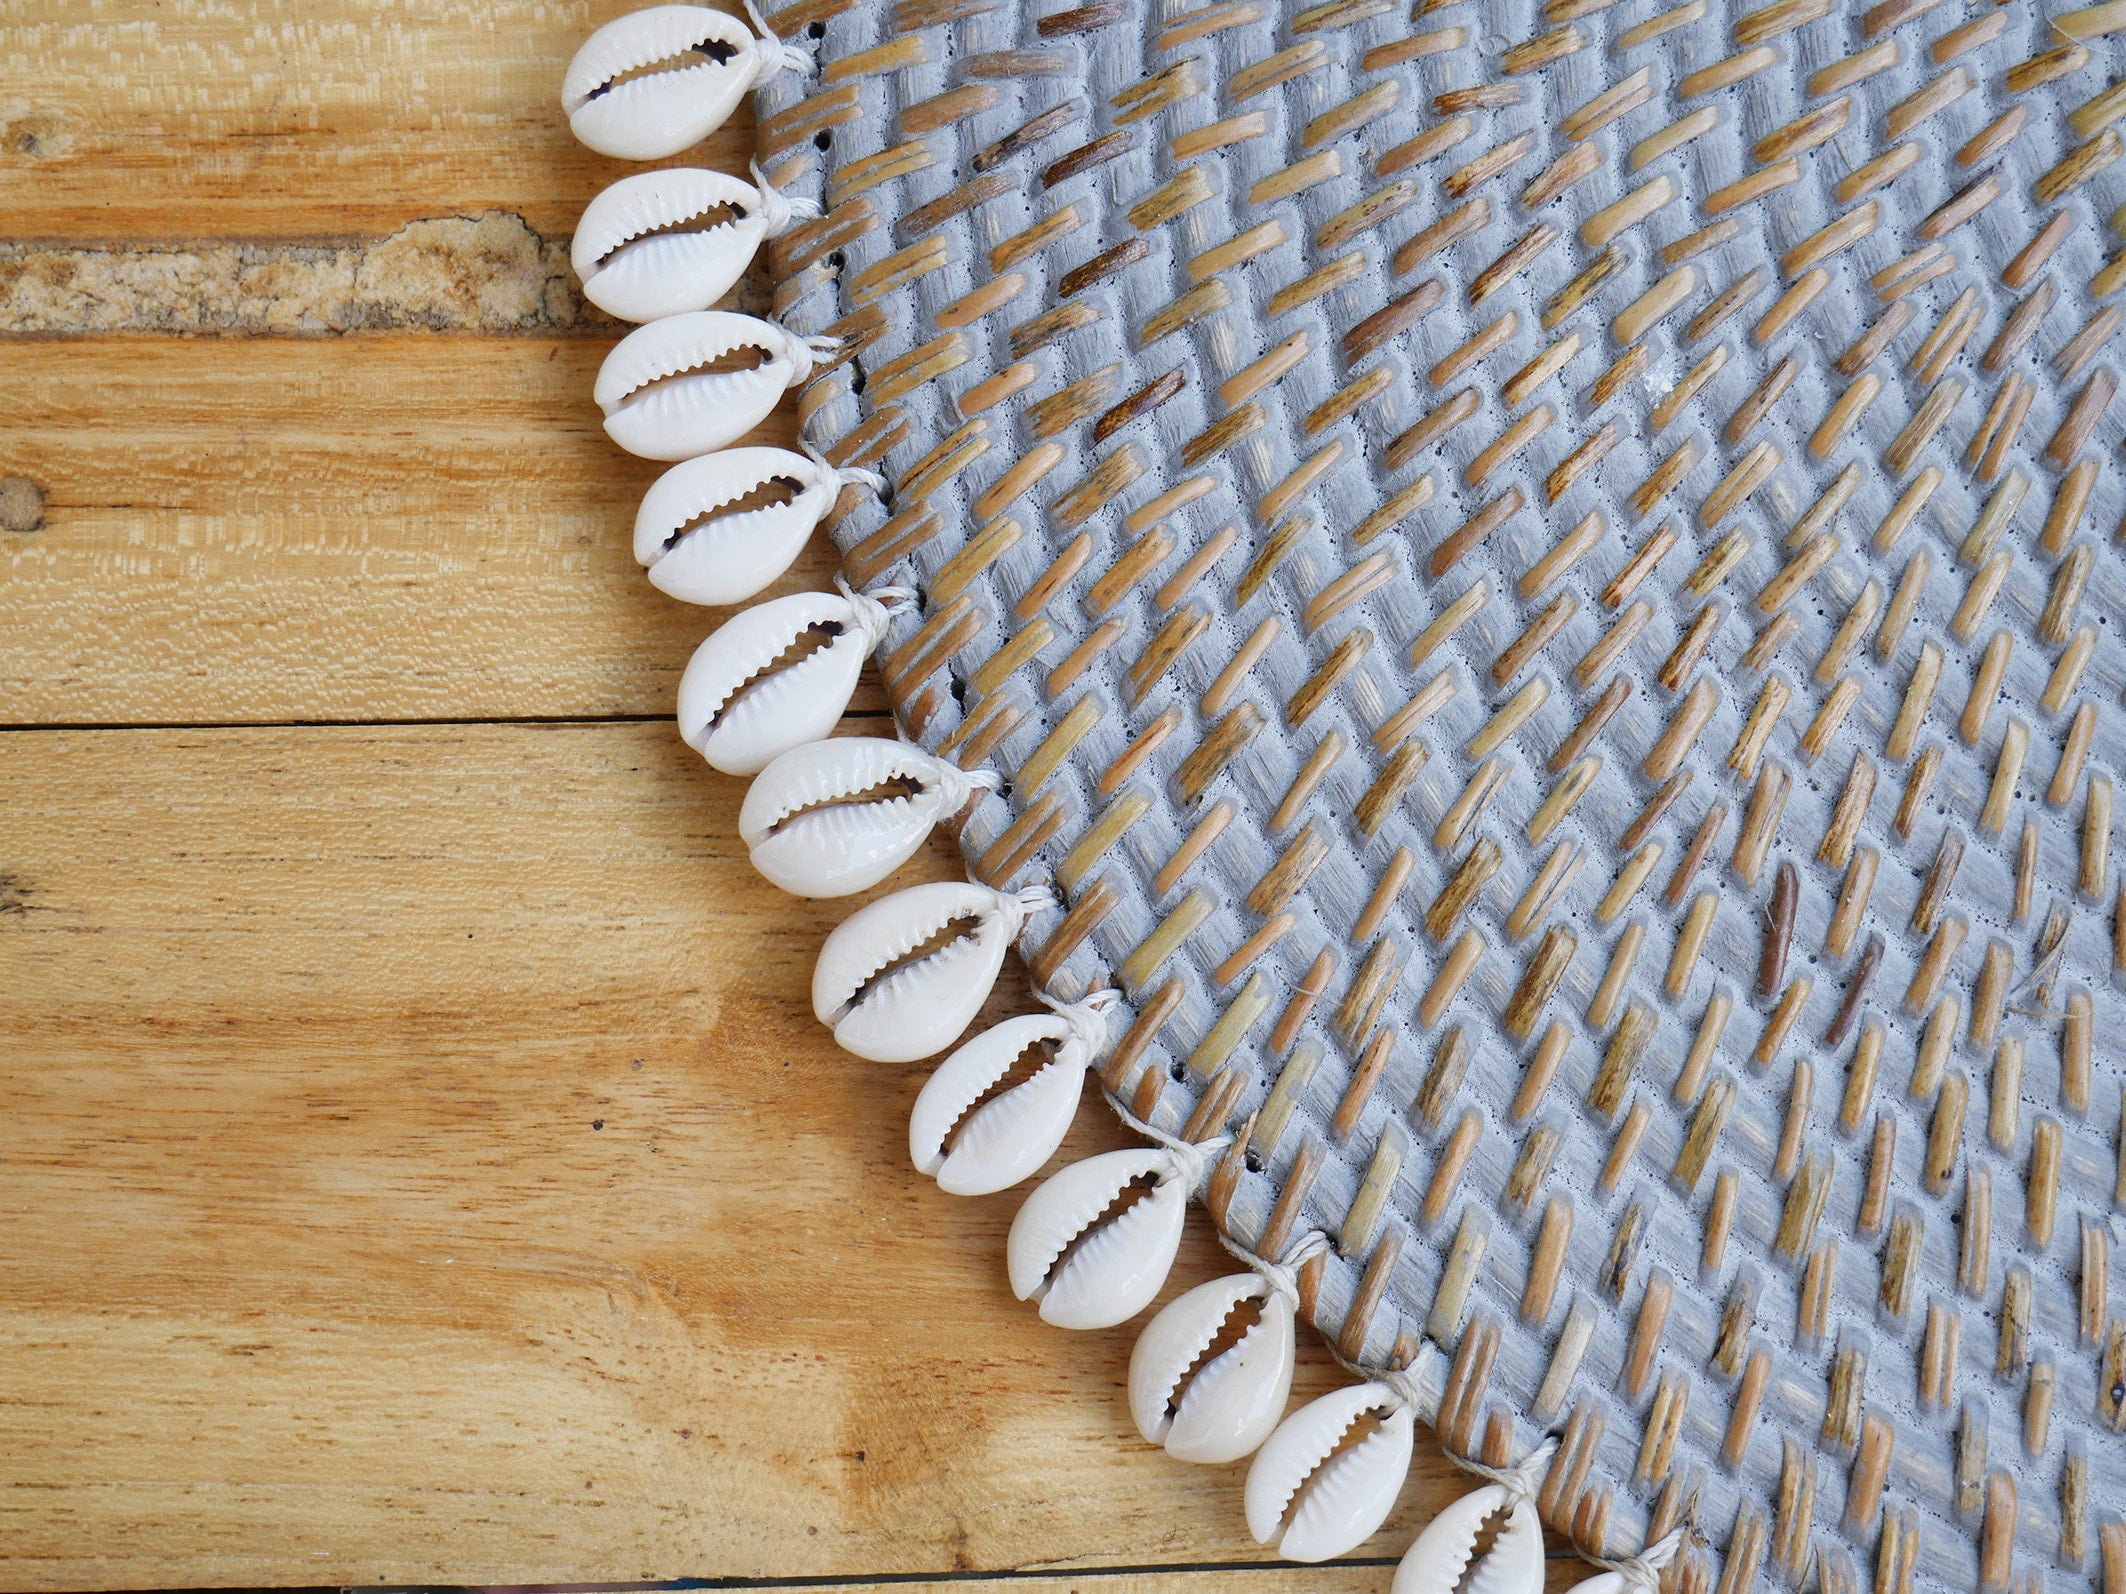 Set of Cowrie Shell Placemates - Rattan Placemates - Boho Kitchen Decor - Cowrie Rattan Underplates - Plate Charger Boho